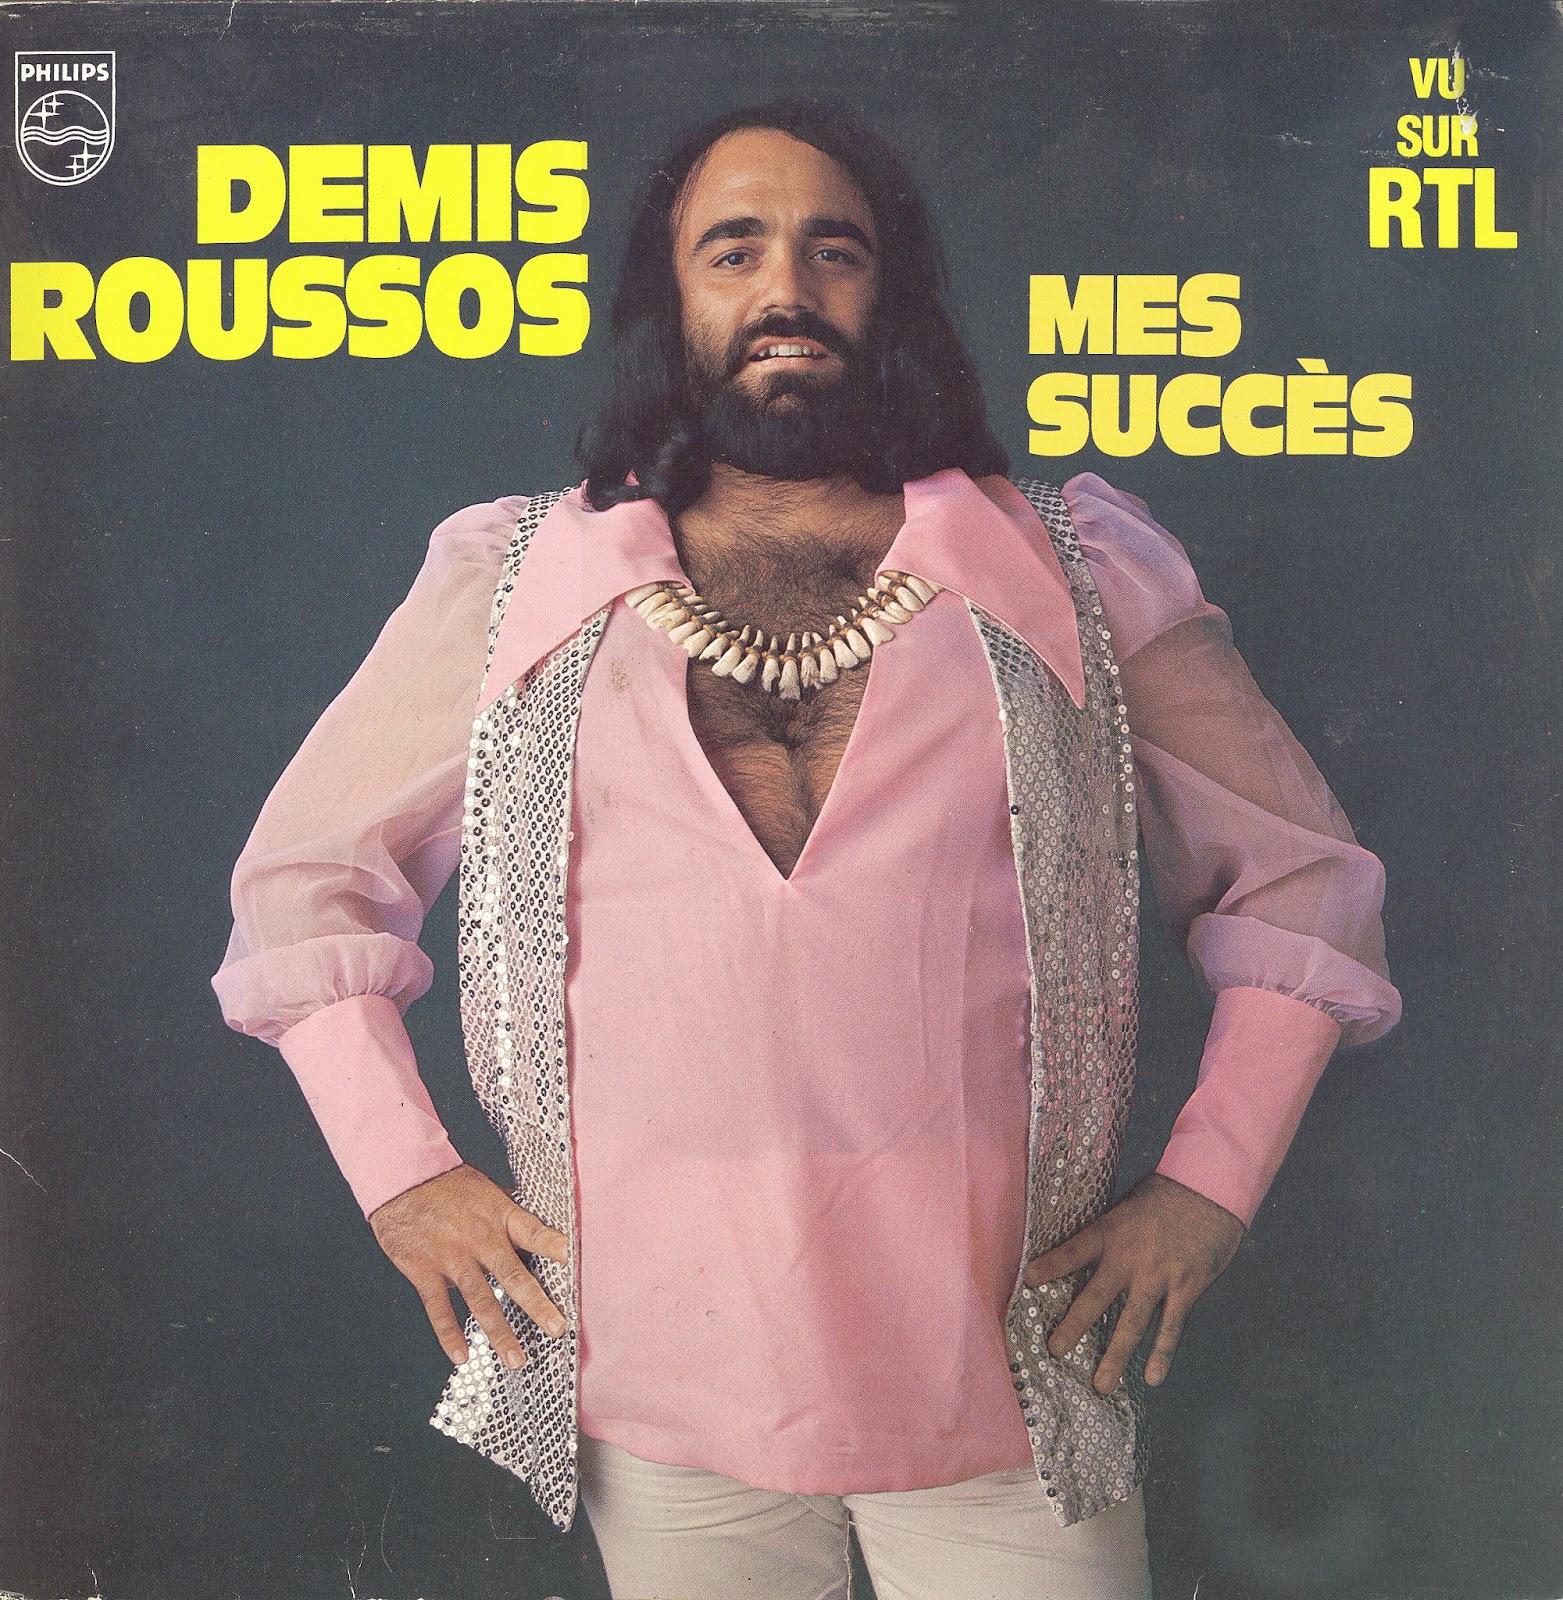 Demis Roussos Man The World Share Cucumber As